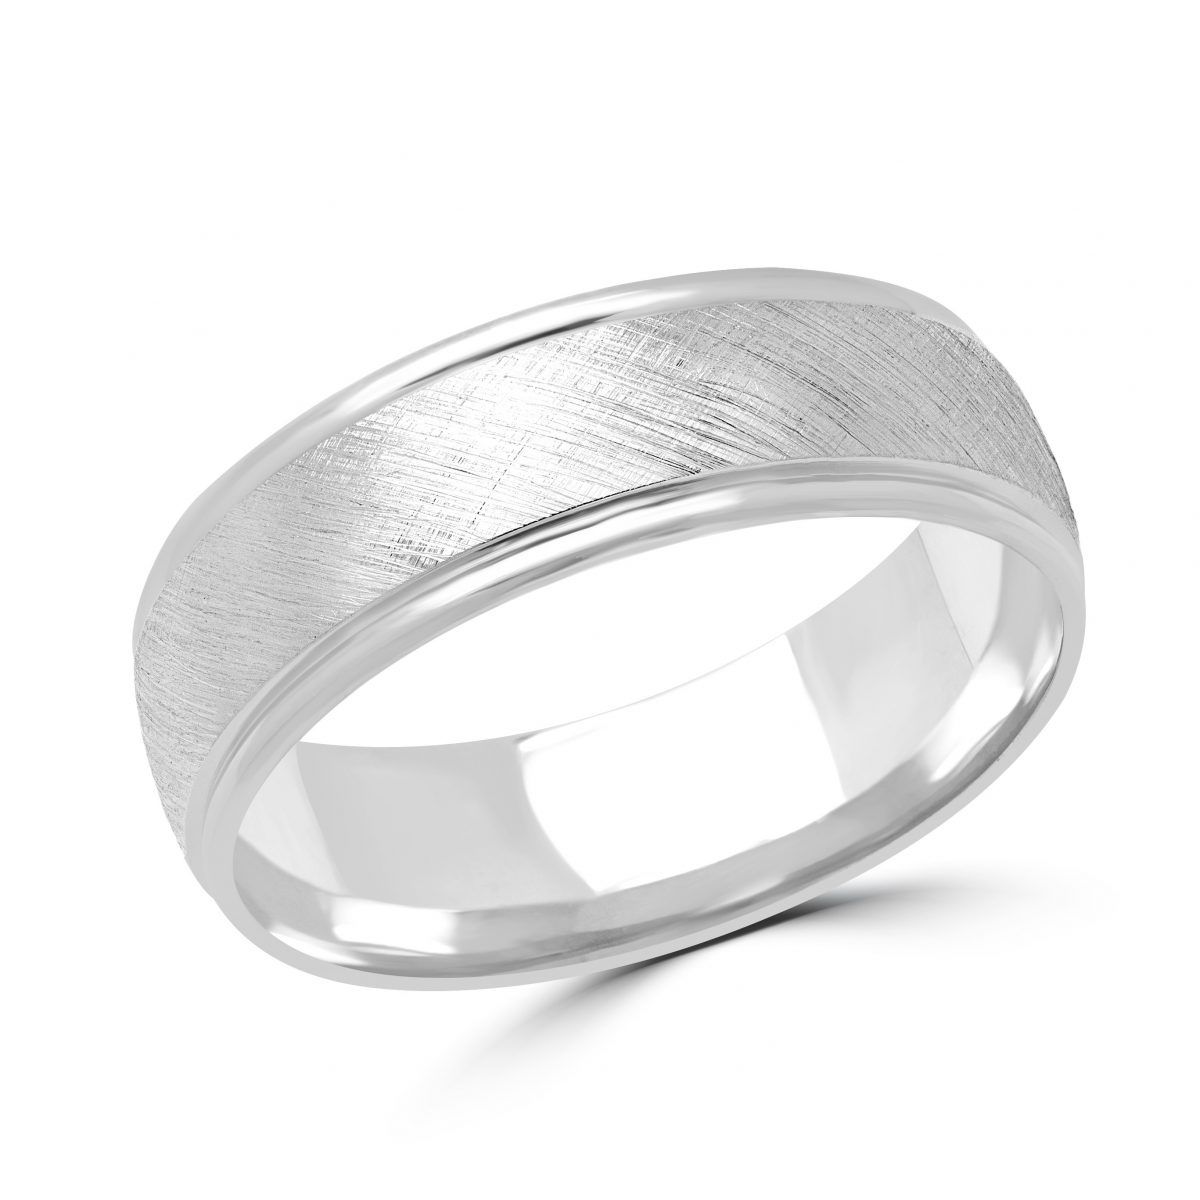 Wedding Band 10k White Gold | Global Diamond Montreal For Most Recently Released Diamond Comfort Fit Wedding Bands In 10k Gold (View 3 of 15)